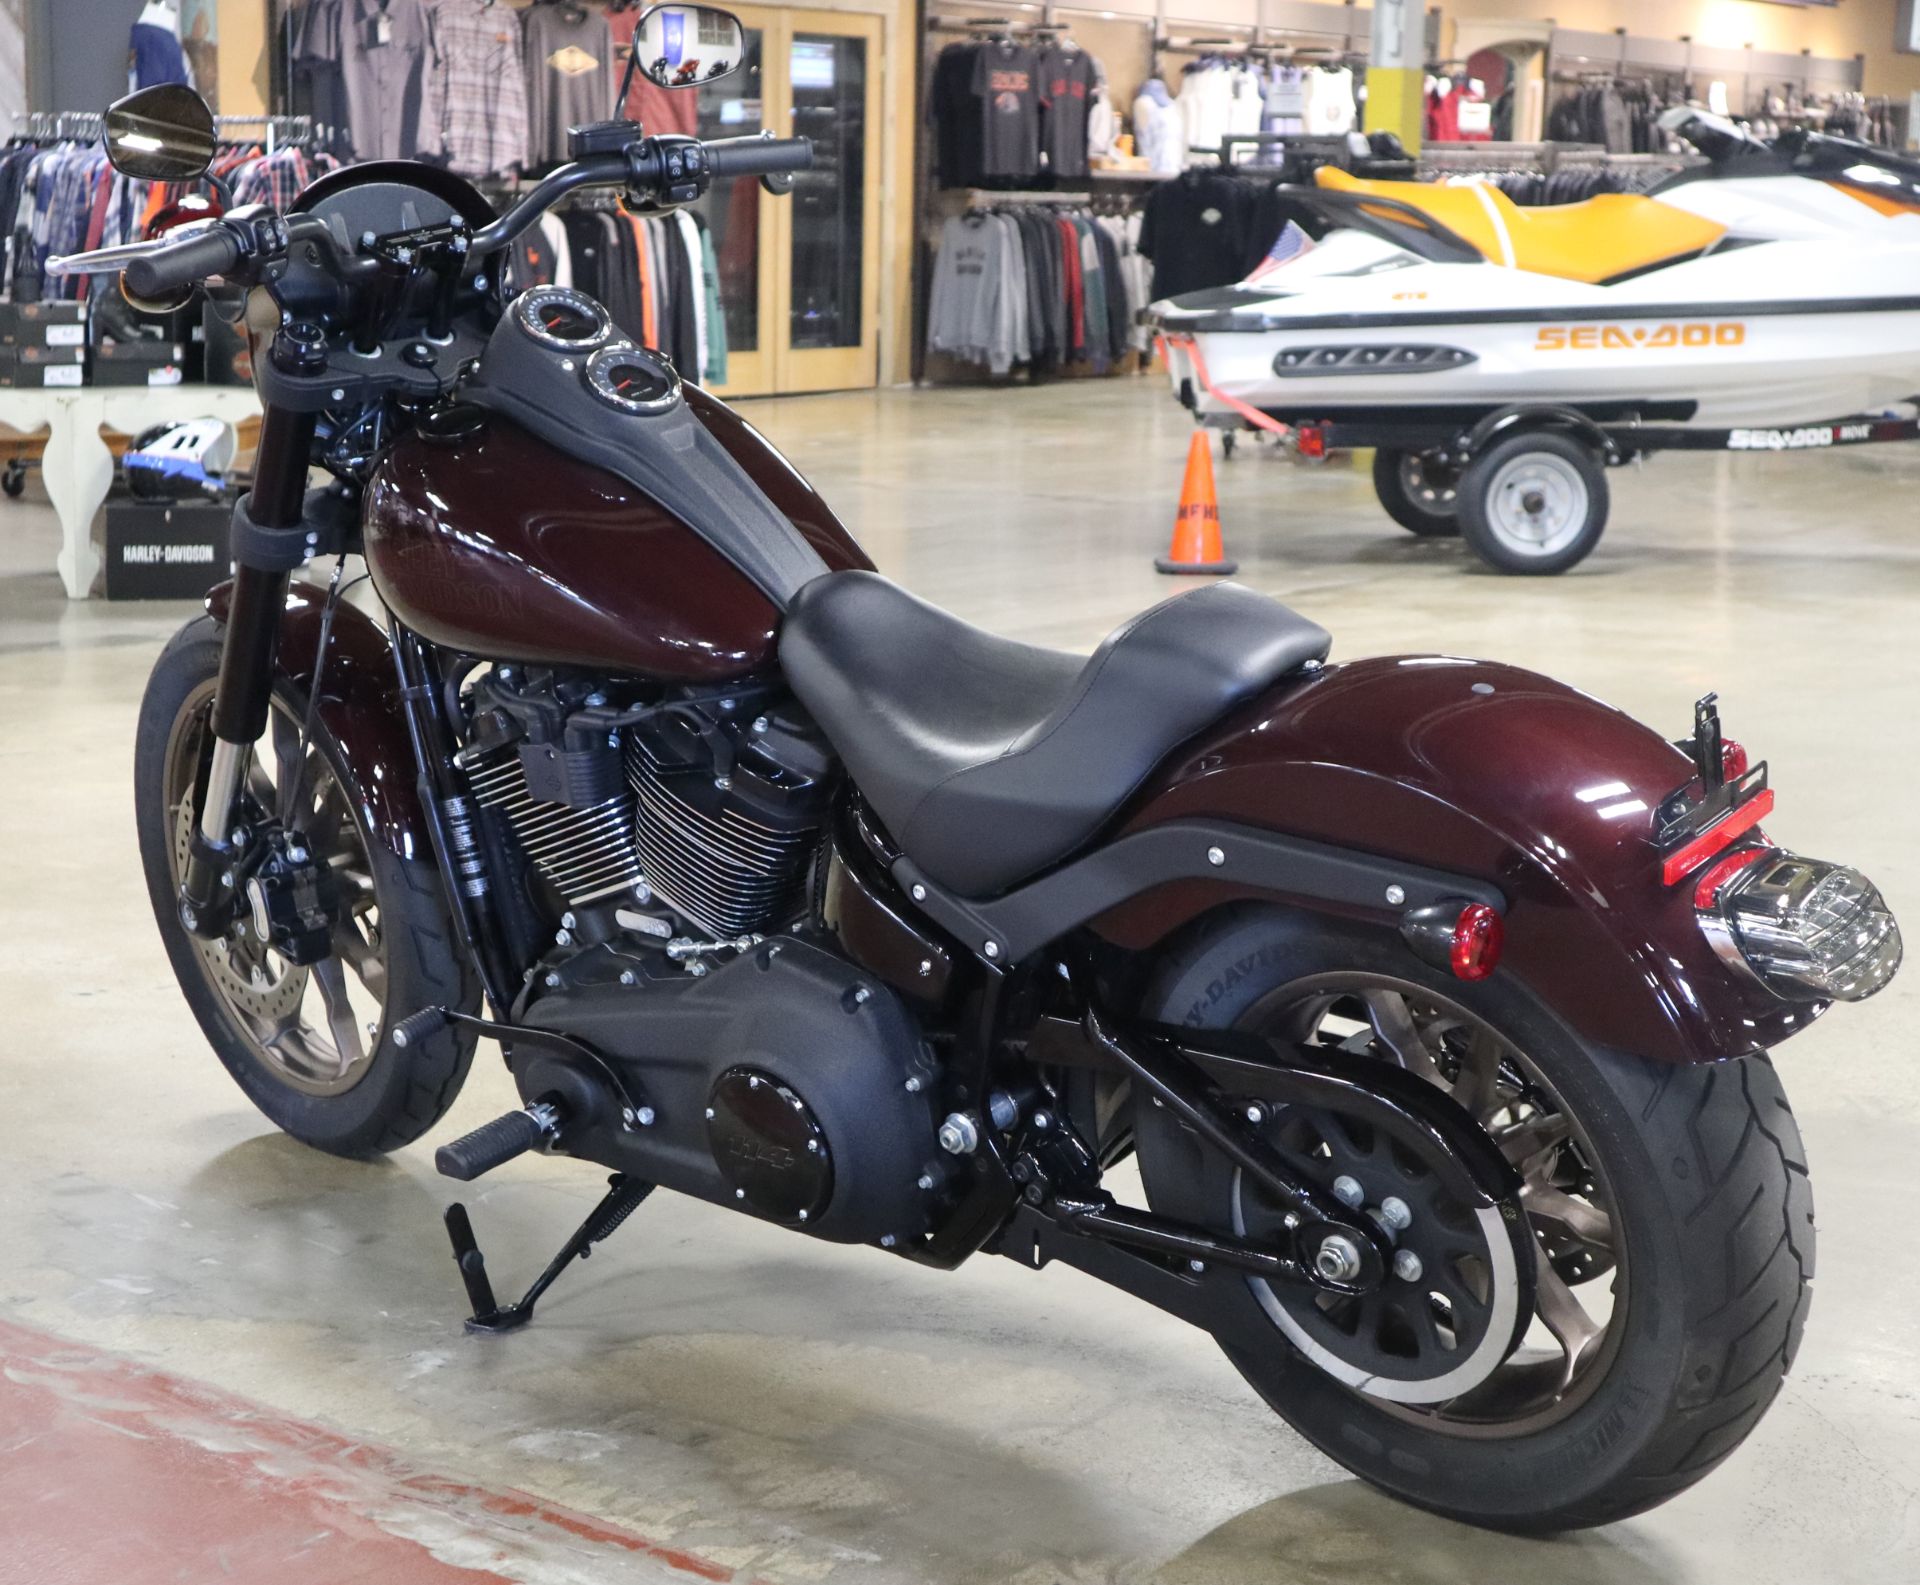 2021 Harley-Davidson Low Rider®S in New London, Connecticut - Photo 6